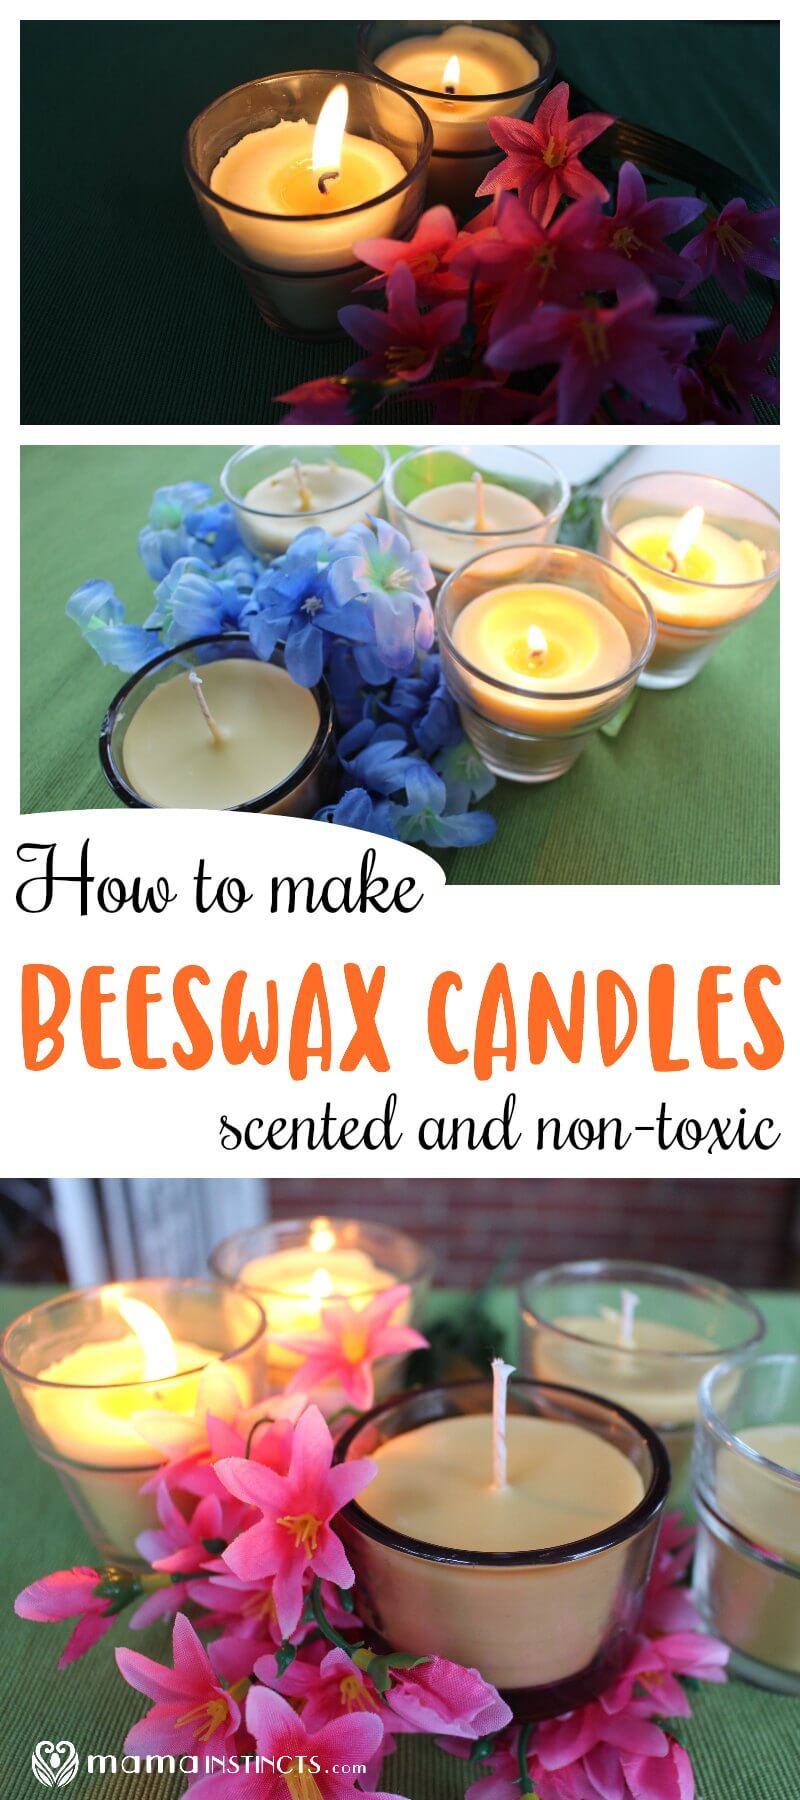 Stay away from the toxic chemicals in paraffin candles. Learn how to make beeswax candles that are safe, non-toxic and clean your air. This DIY candle recipe is extremely easy to make and you can customize the candle scent to your liking.